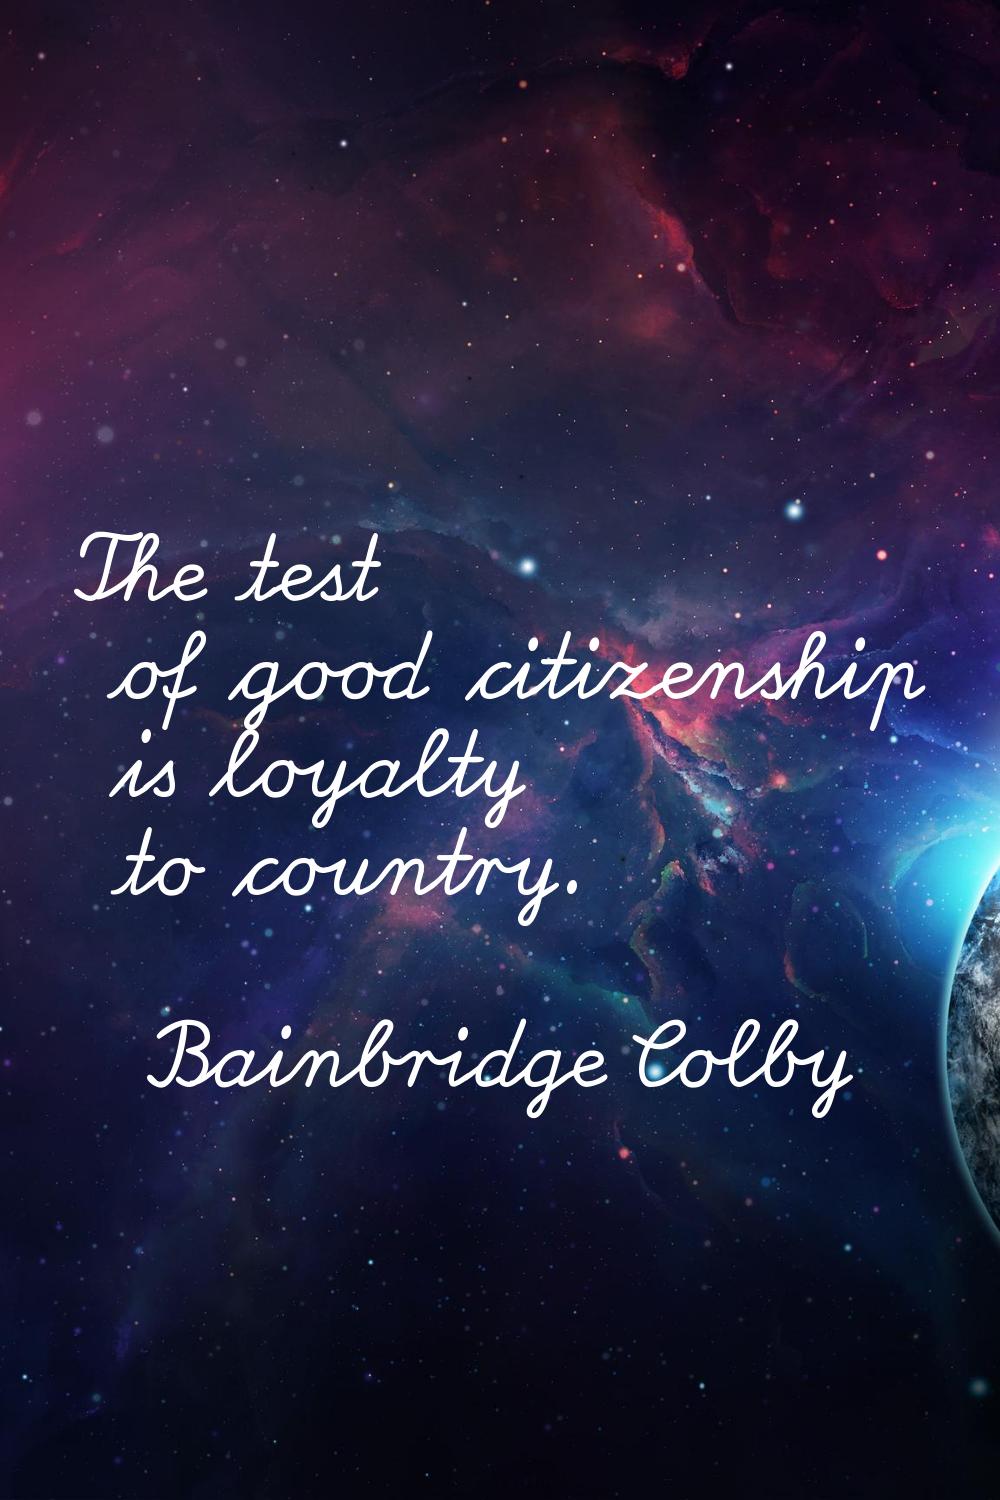 The test of good citizenship is loyalty to country.